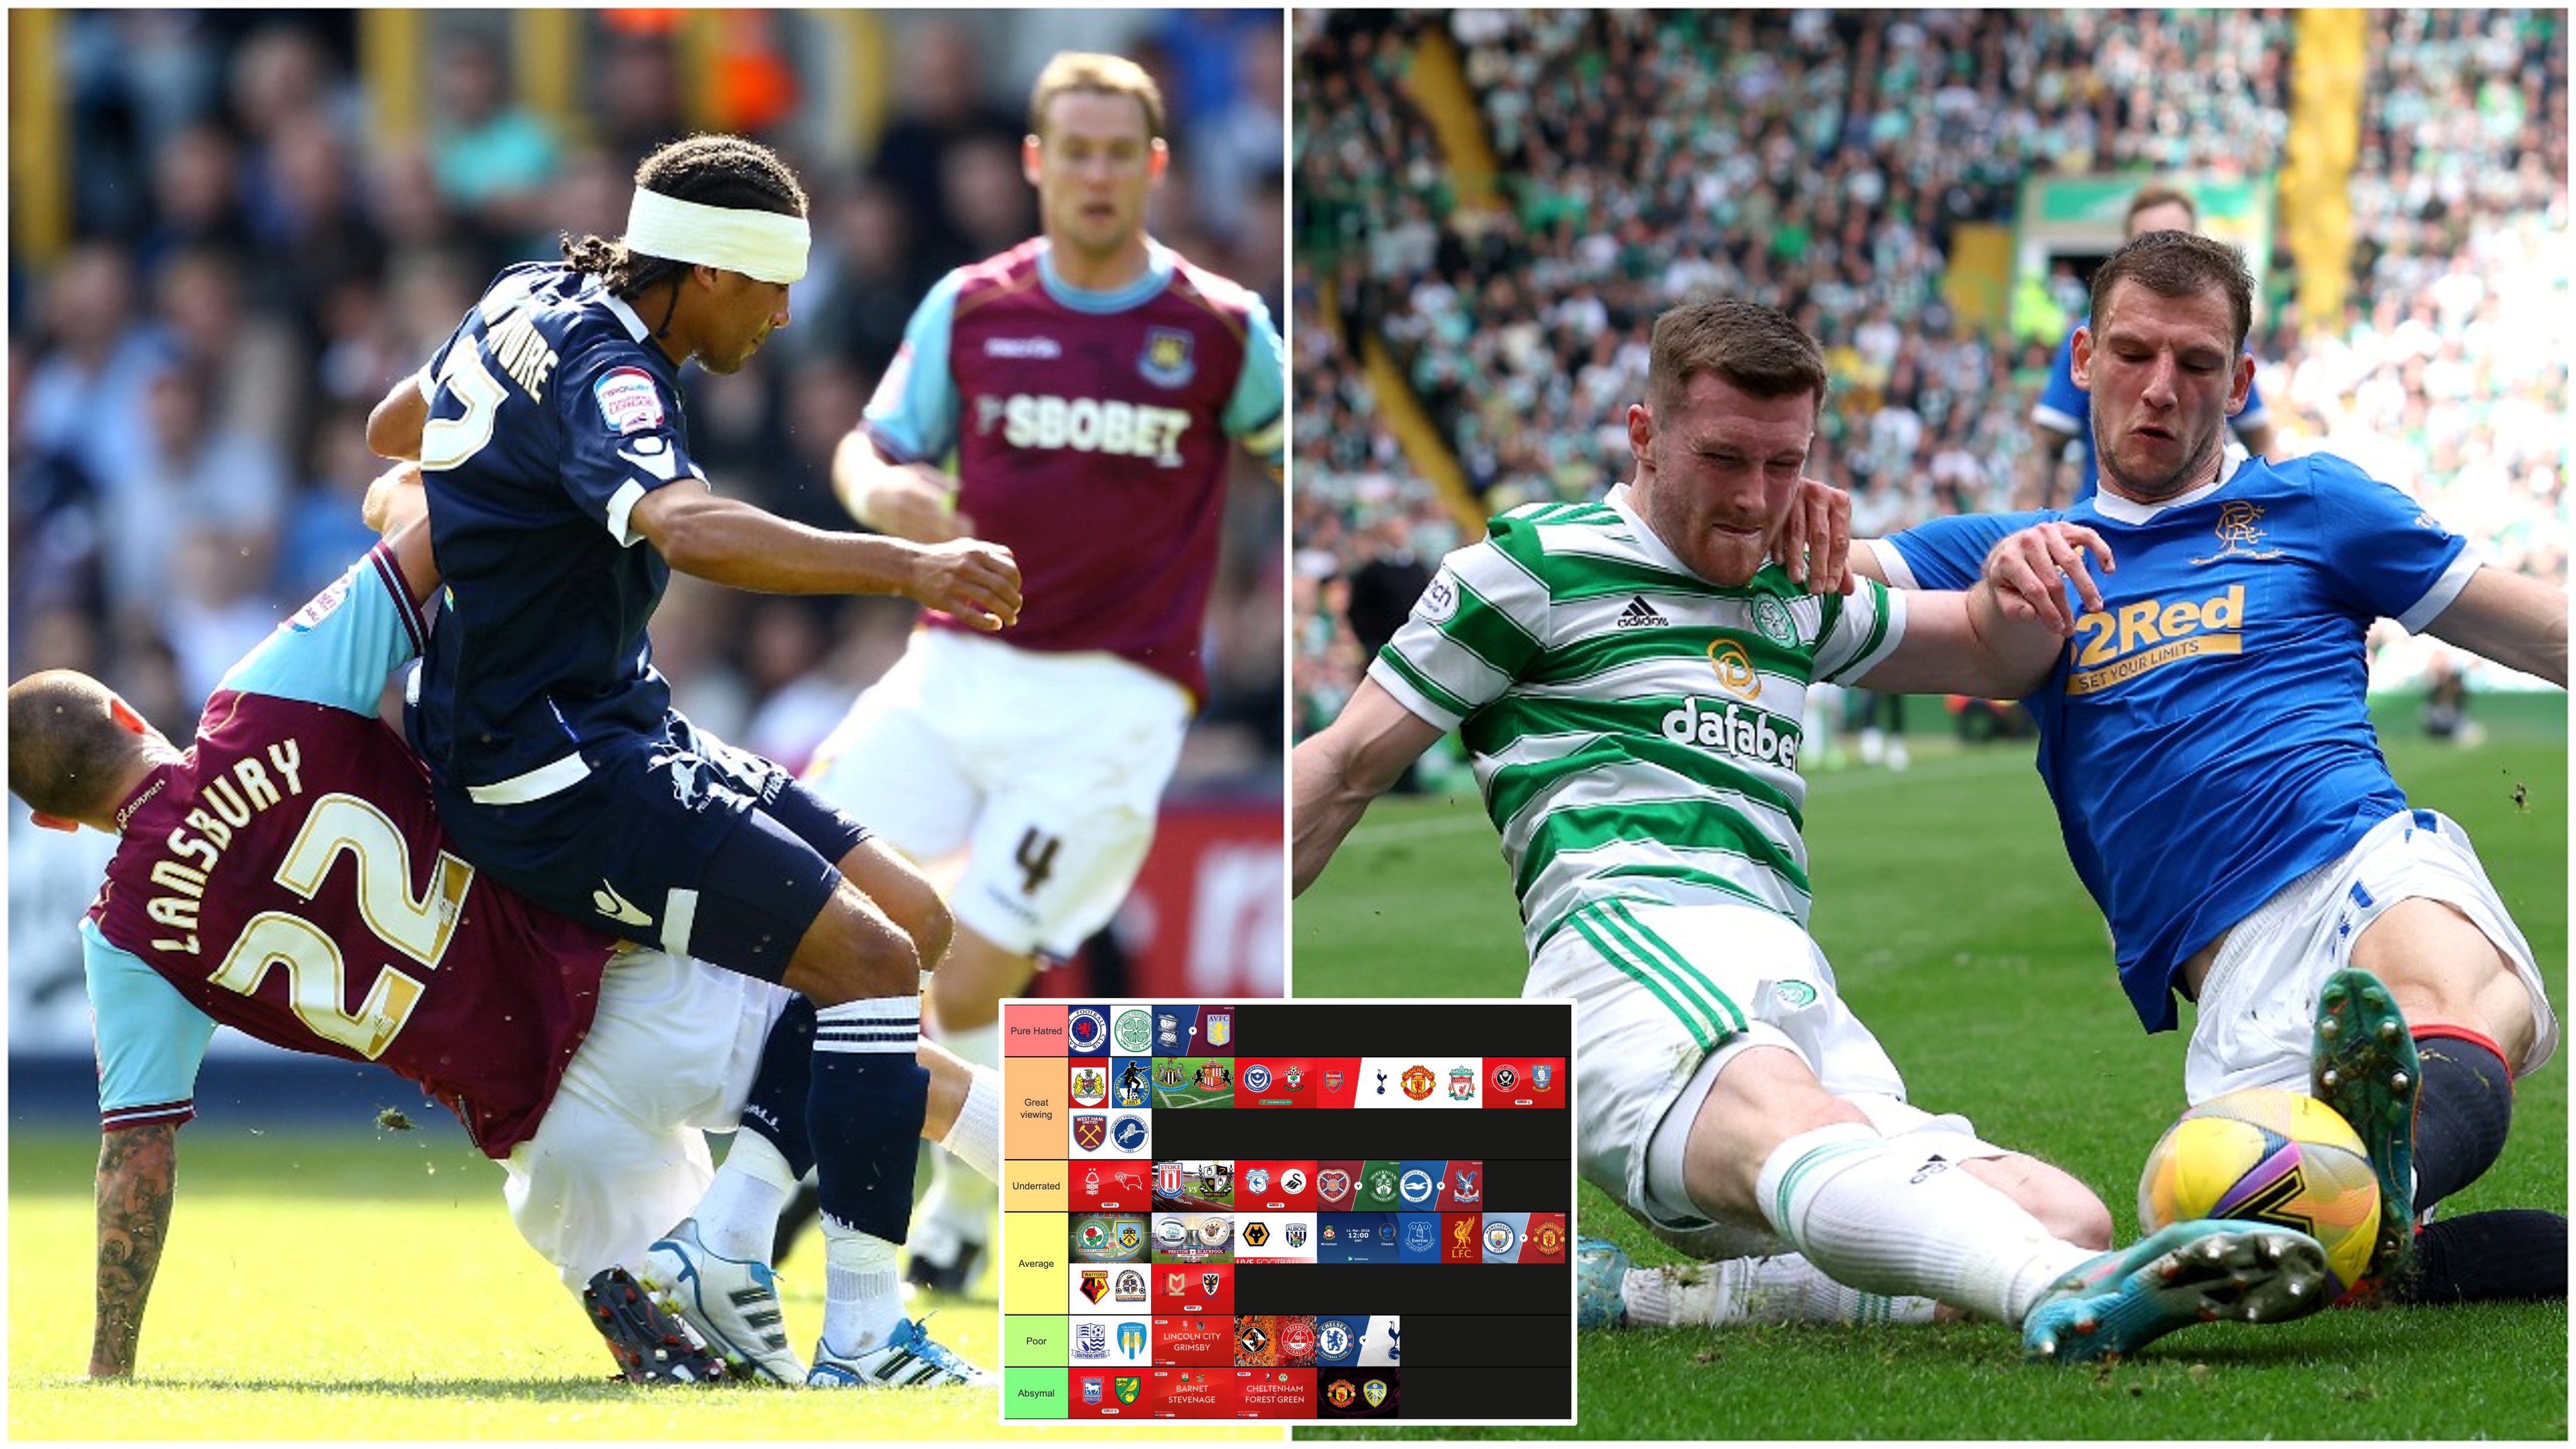 Britain's greatest rivalries: Celtic vs Rangers and West Ham vs Millwall